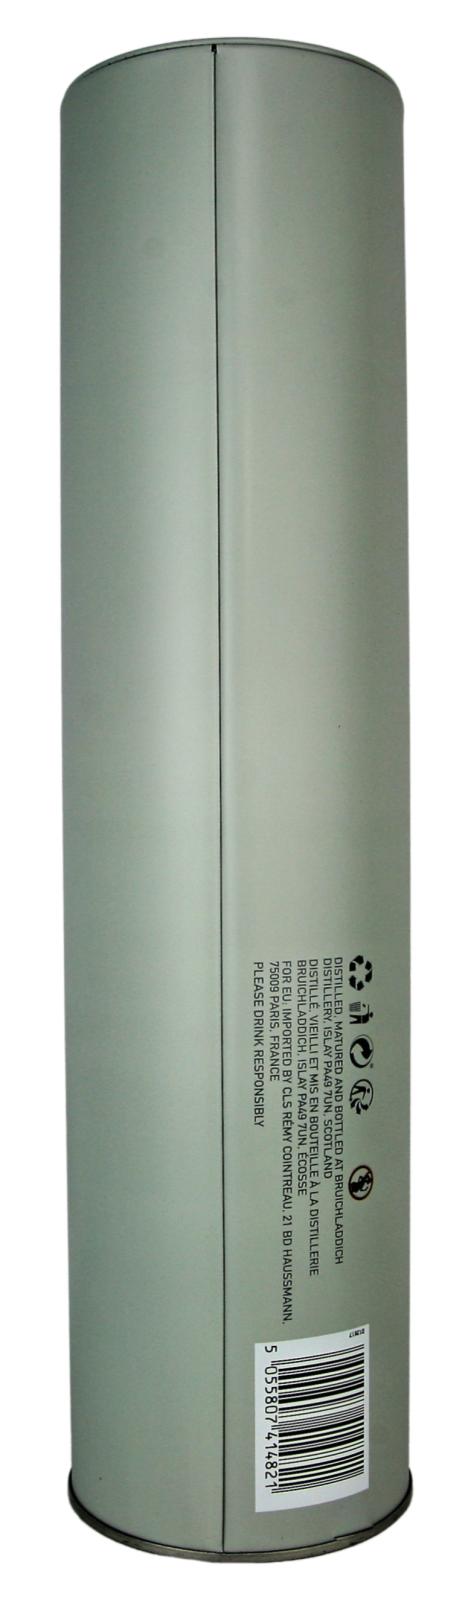 Octomore Edition 12.3 / 118.1 PPM